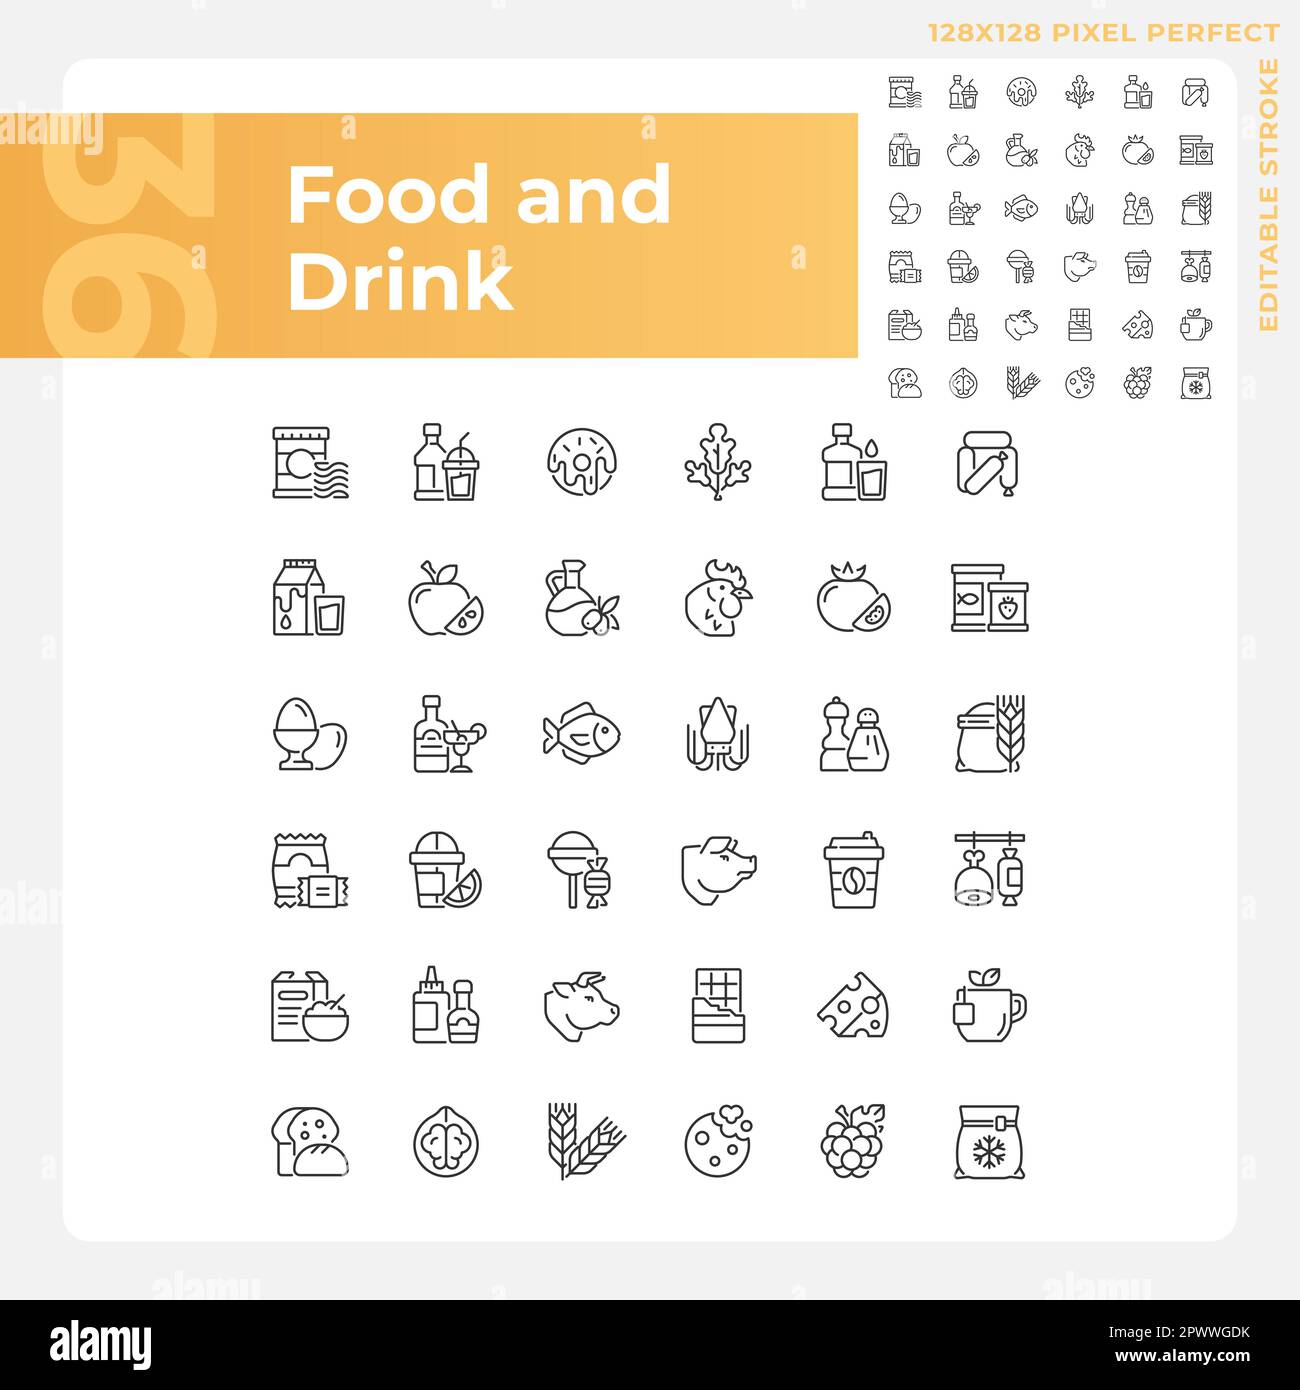 Food and drink pixel perfect linear icons set Stock Vector